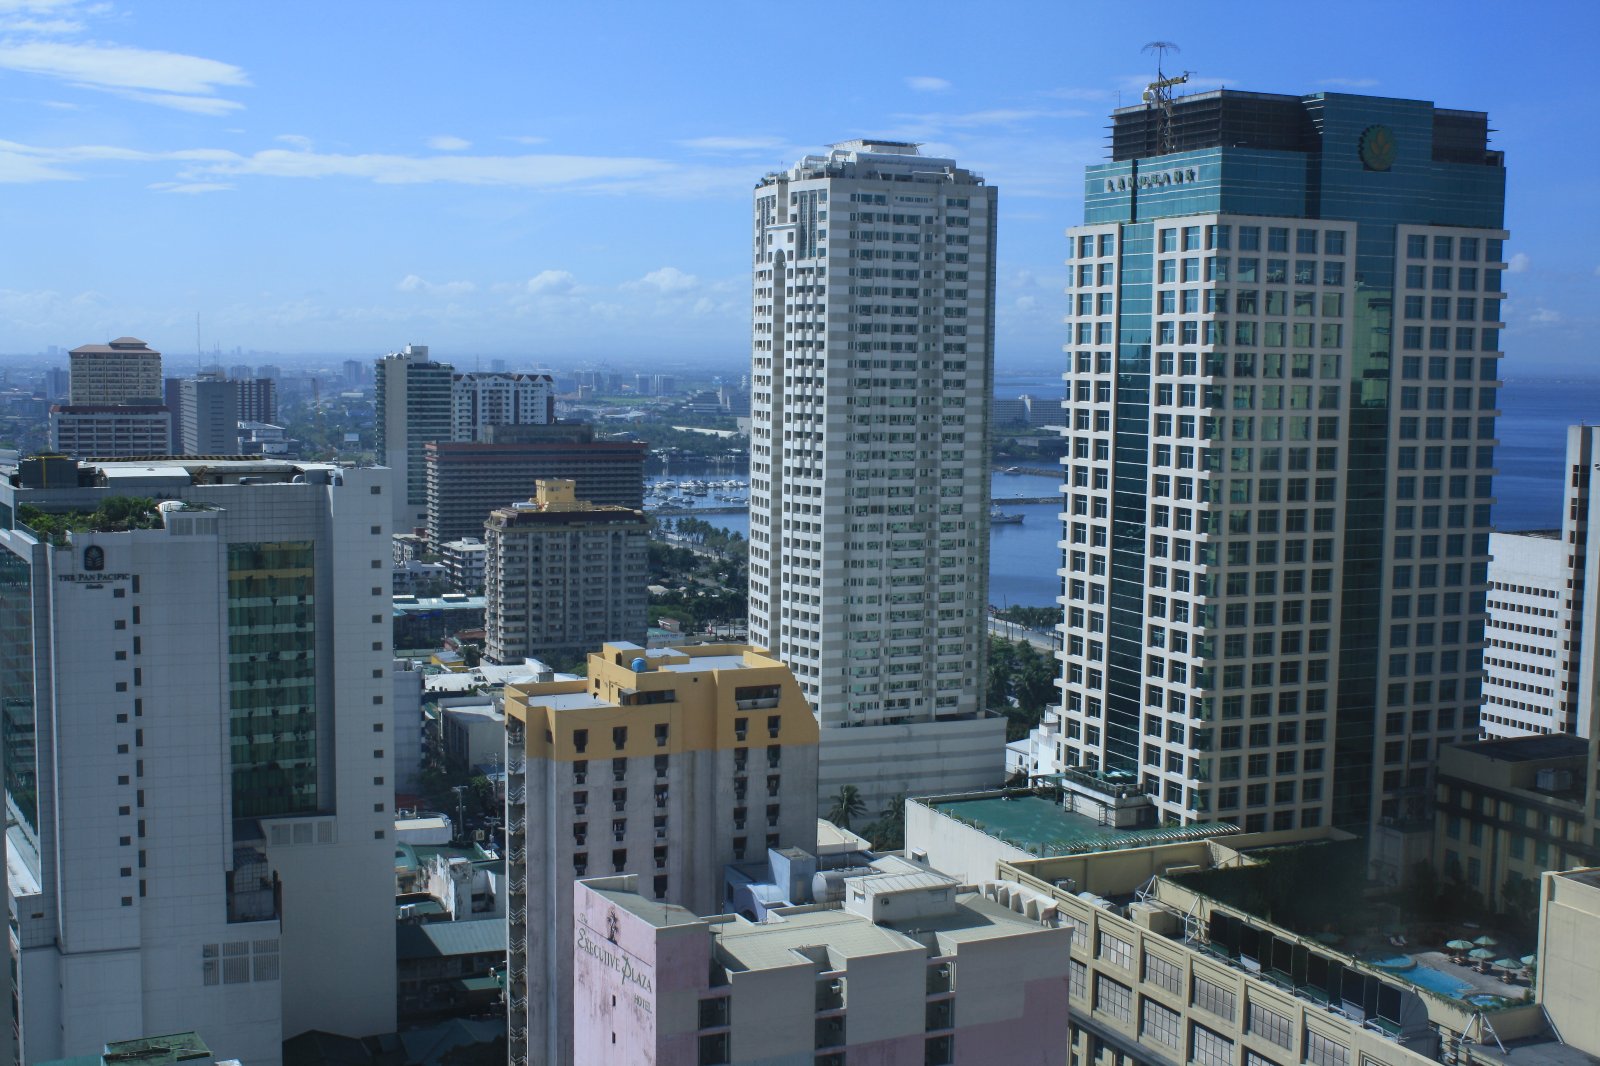 Manila Yacht Club and some tall buildings in Malate